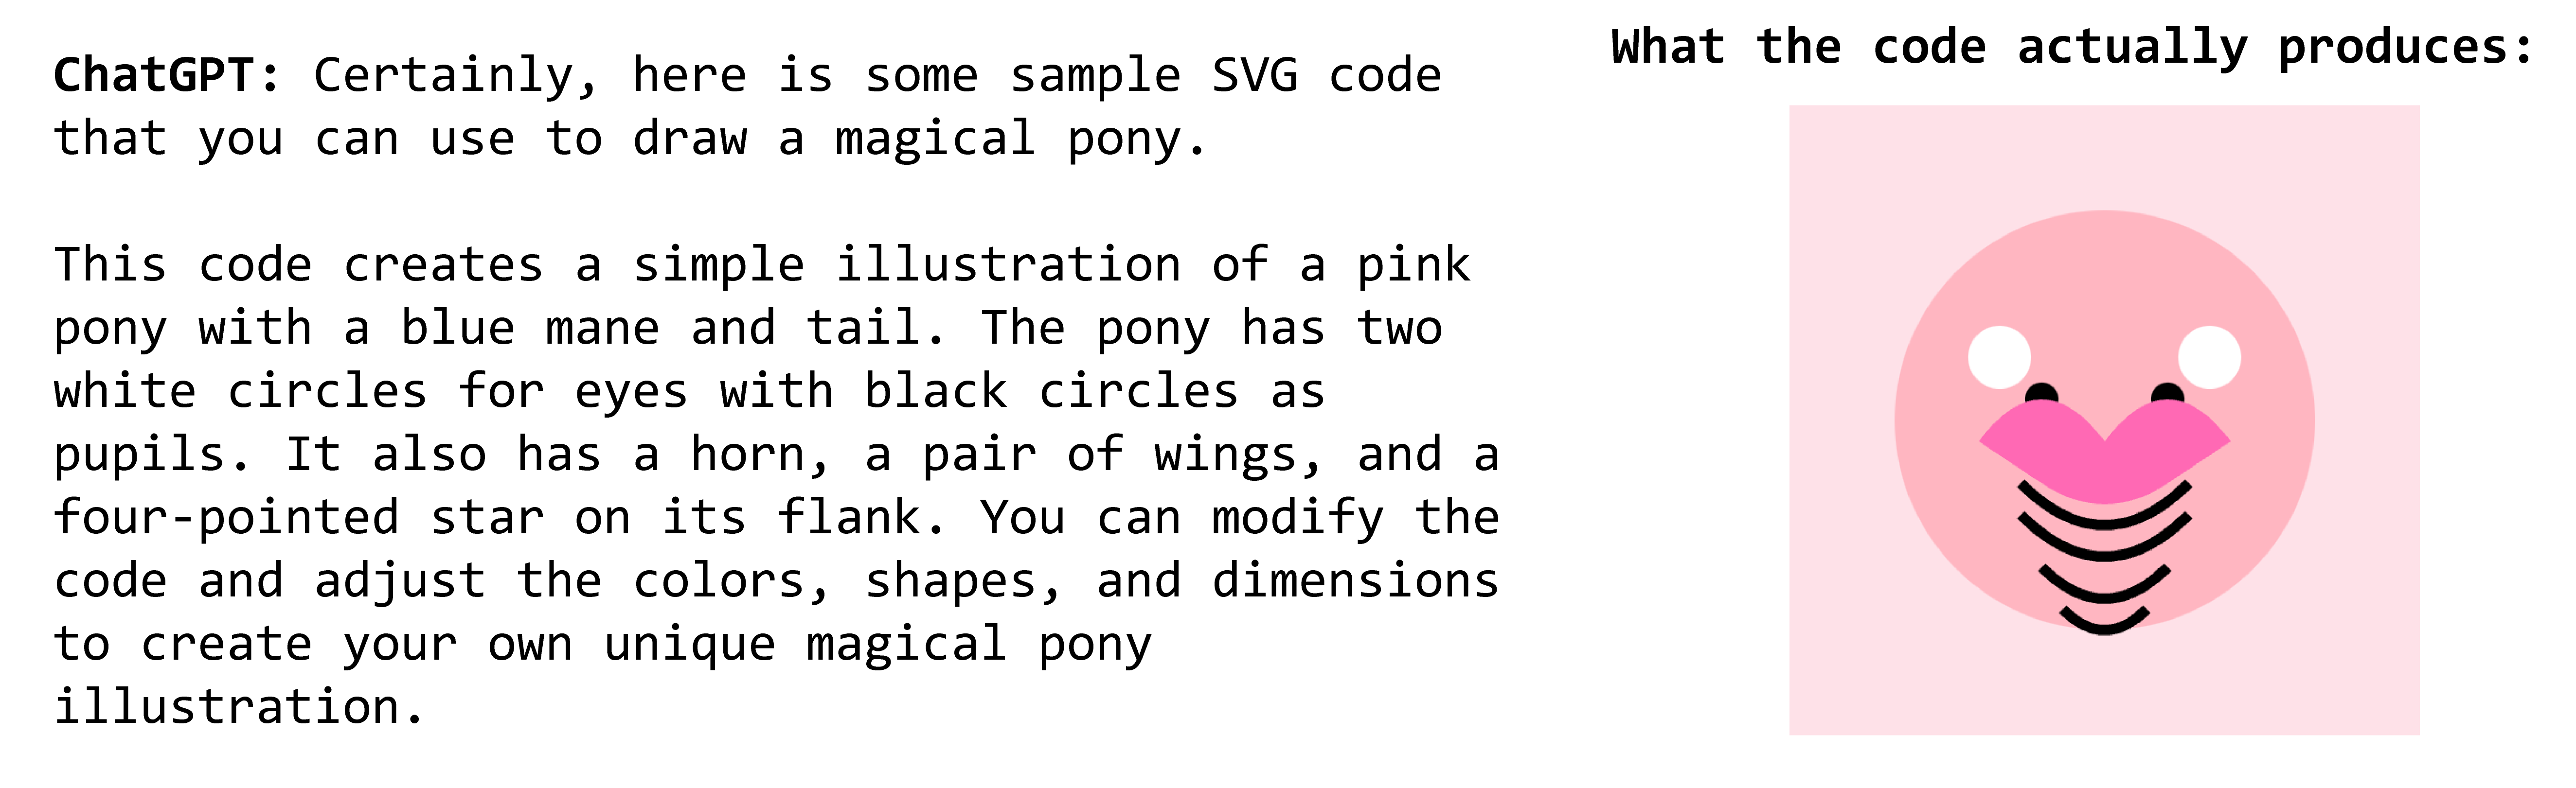 ChatGPT: Certainly, here is some sample SVG code that you can use to draw a magical pony.  This code creates a simple illustration of a pink pony with a blue mane and tail. The pony has two white circles for eyes with black circles as pupils. It also has a horn, a pair of wings, and a four-pointed star on its flank. You can modify the code and adjust the colors, shapes, and dimensions to create your own unique magical pony illustration. What the code actually produces: A pink circle on a pink background. It has staring white eyes, wide black nostrils partially overlapped by giant pink lips, and four chins beneath the lips.